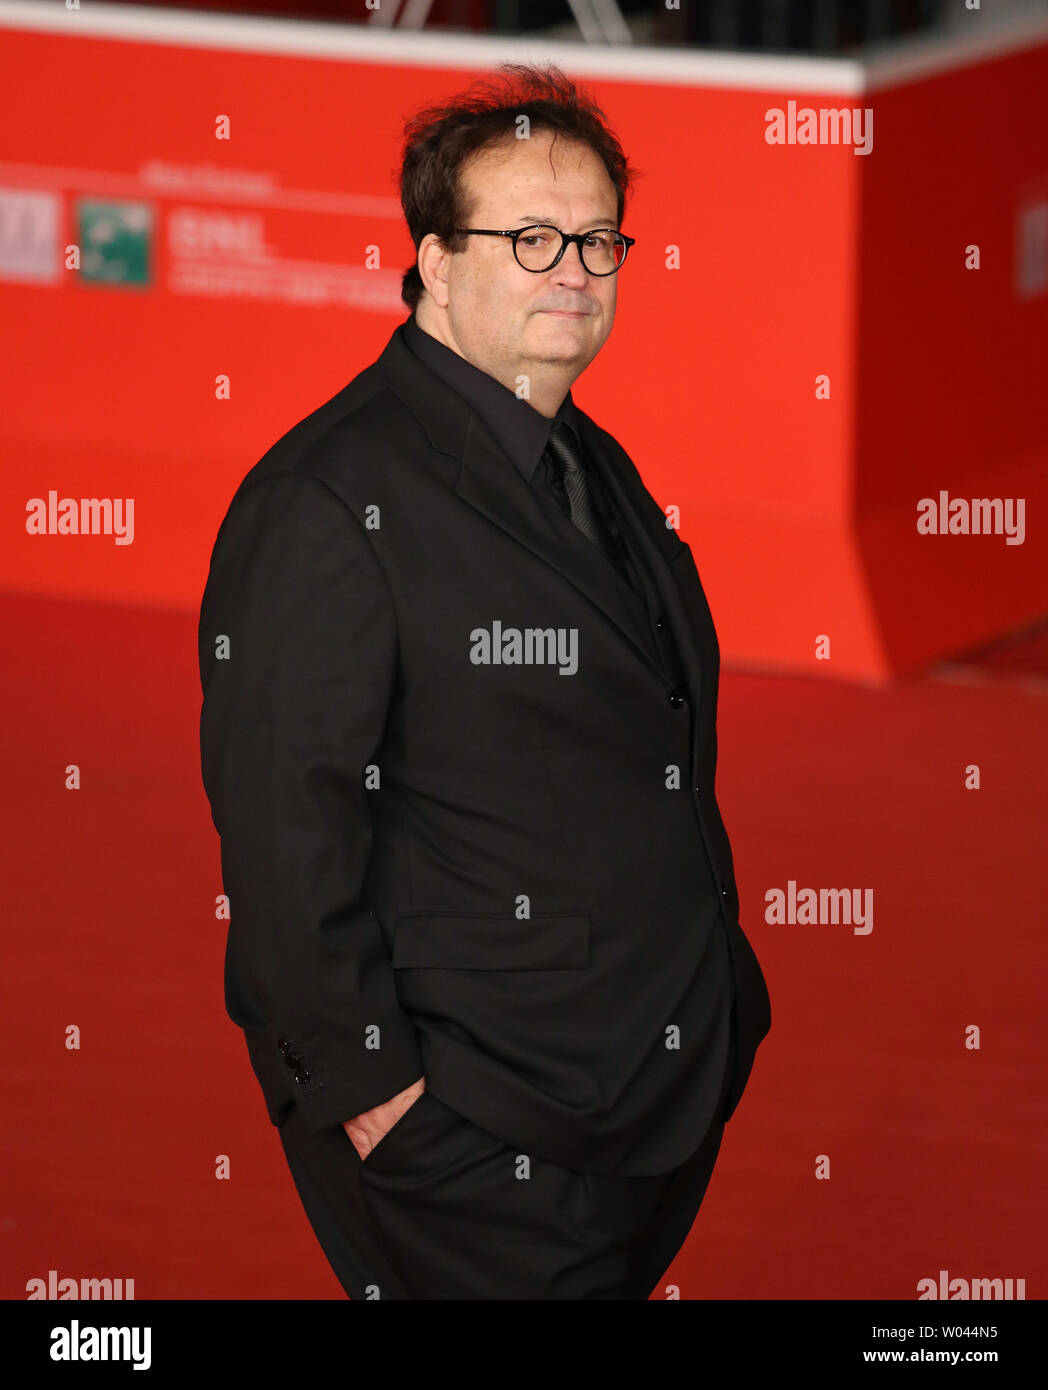 Carlo Carlei arrives on the red carpet before the screening of the film 'Romeo and Juliet' during the 8th annual Rome International Film Festival in Rome on November 11, 2013.   UPI/David Silpa Stock Photo